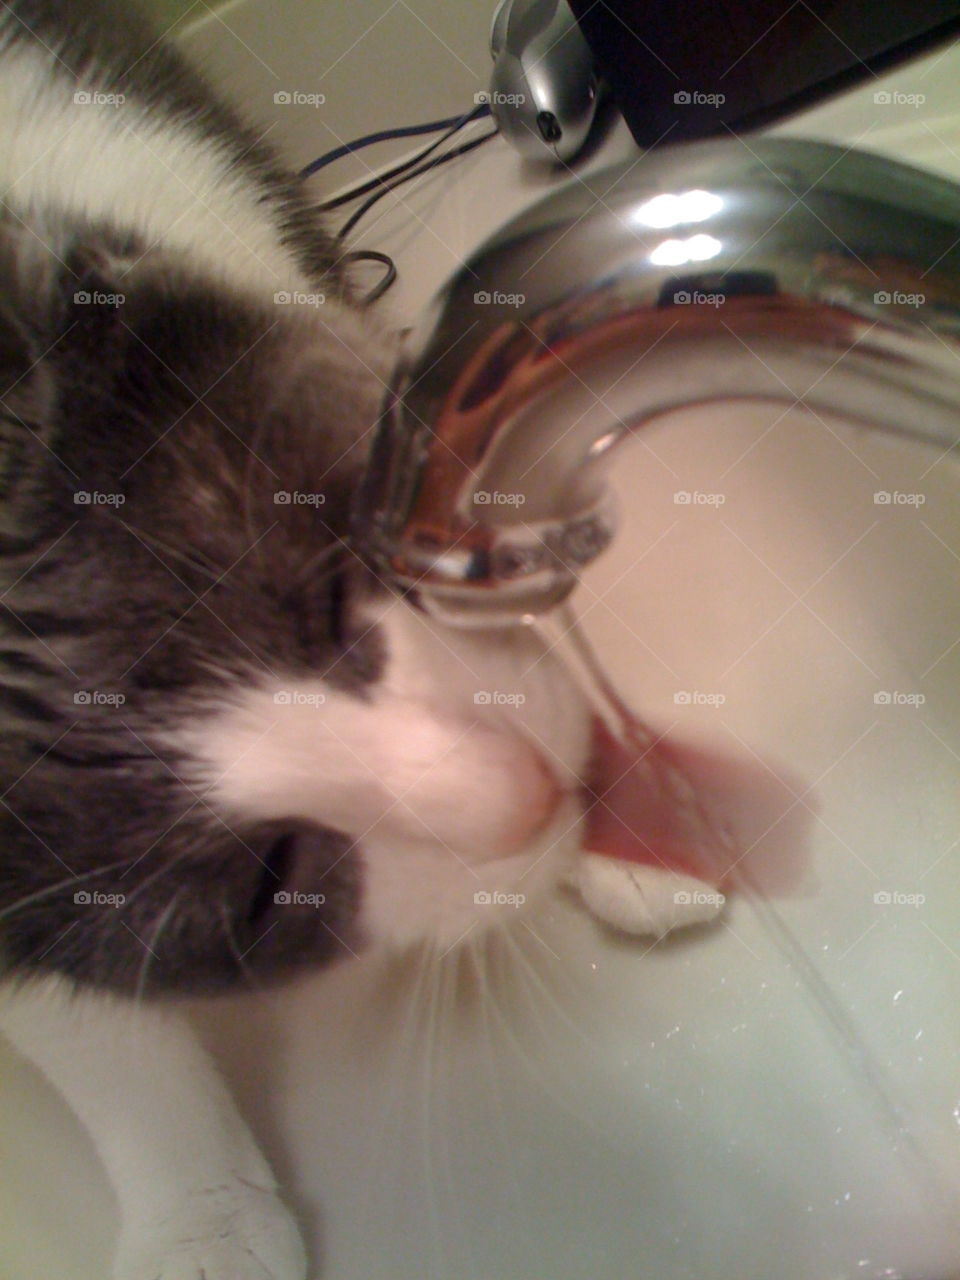 Thirsty . Silly cat drinking water